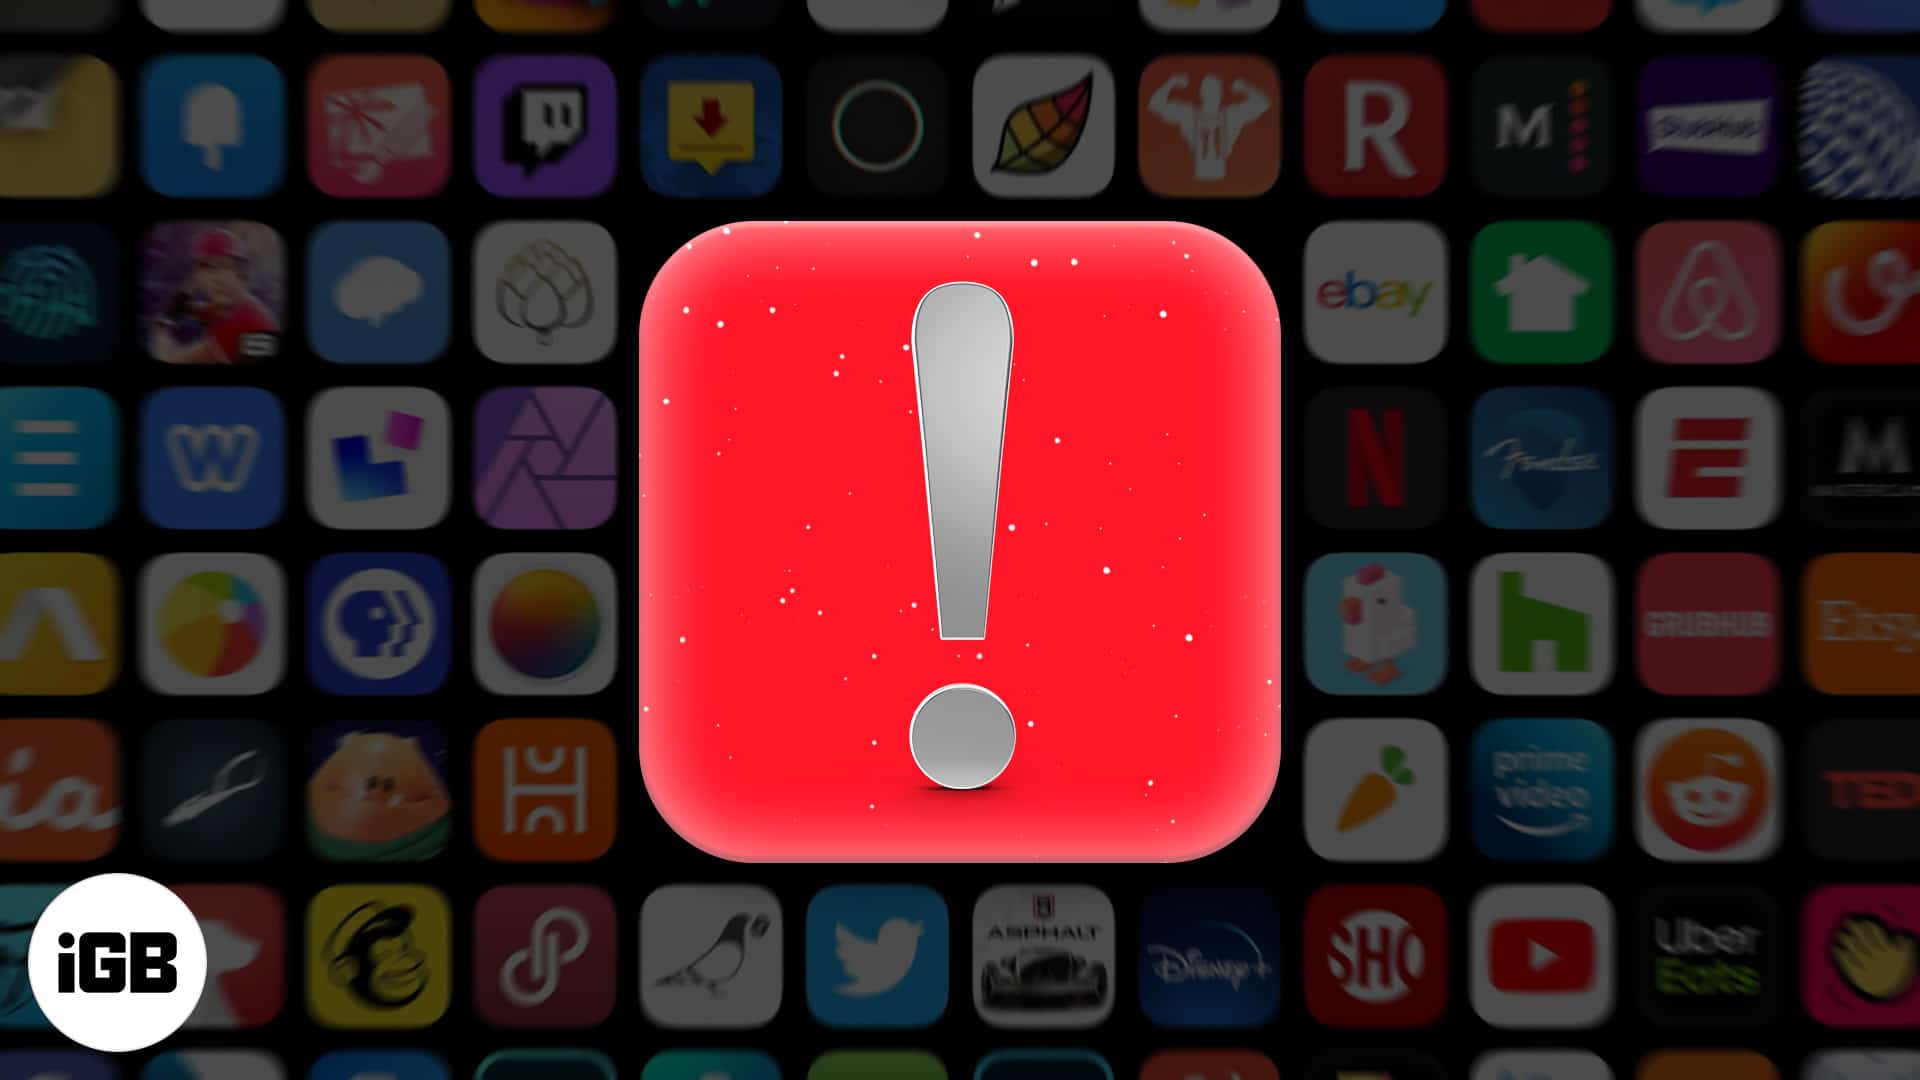 App not working or opening on iPhone? Here are 11 real fixes!